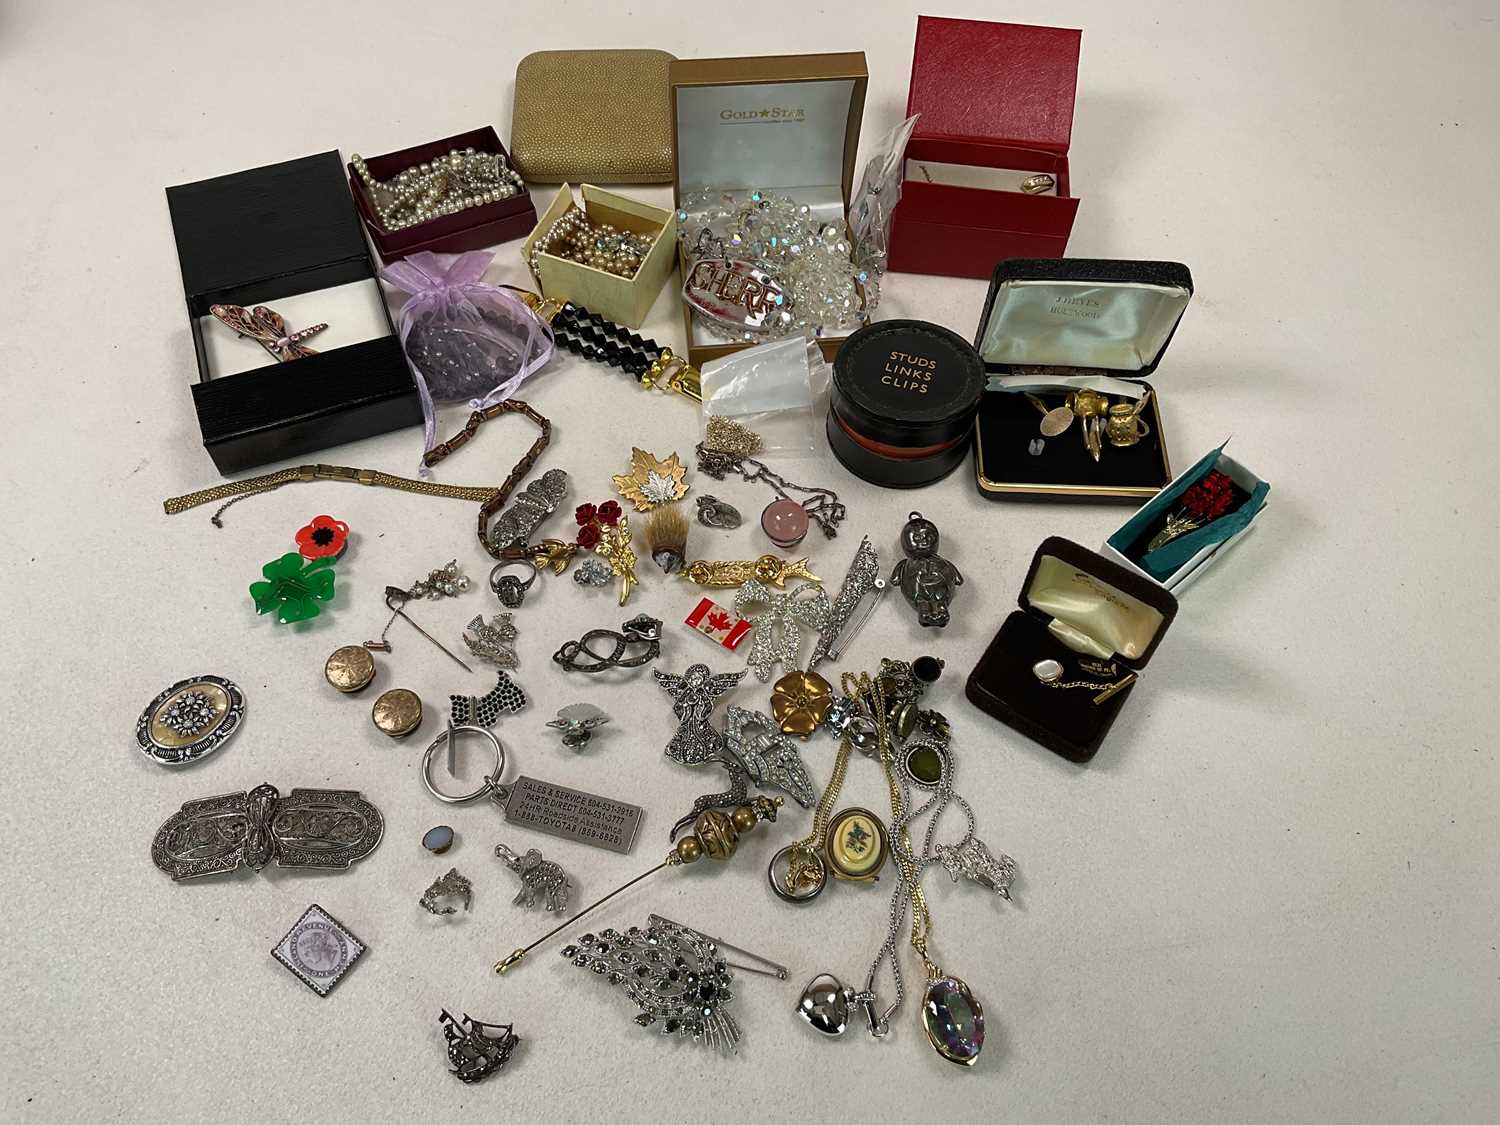 A collection of costume jewellery in a wooden box includes brooches, earrings, watches and others - Image 2 of 4